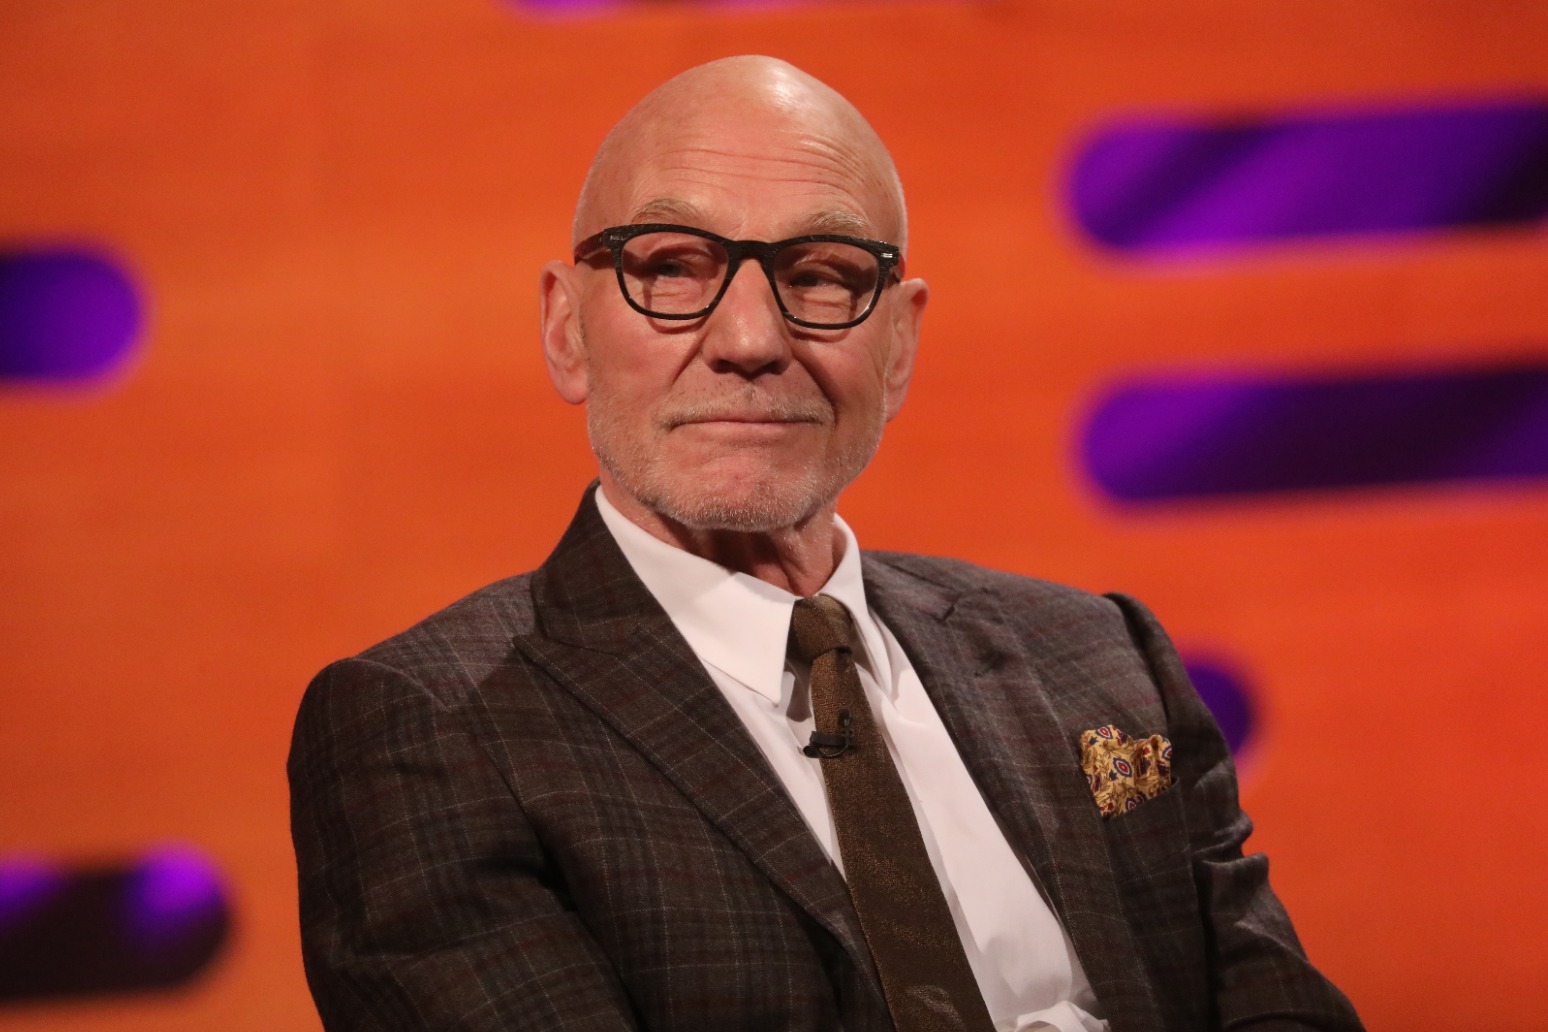 Patrick Stewart: I am anxious about environment and conflicts around world 